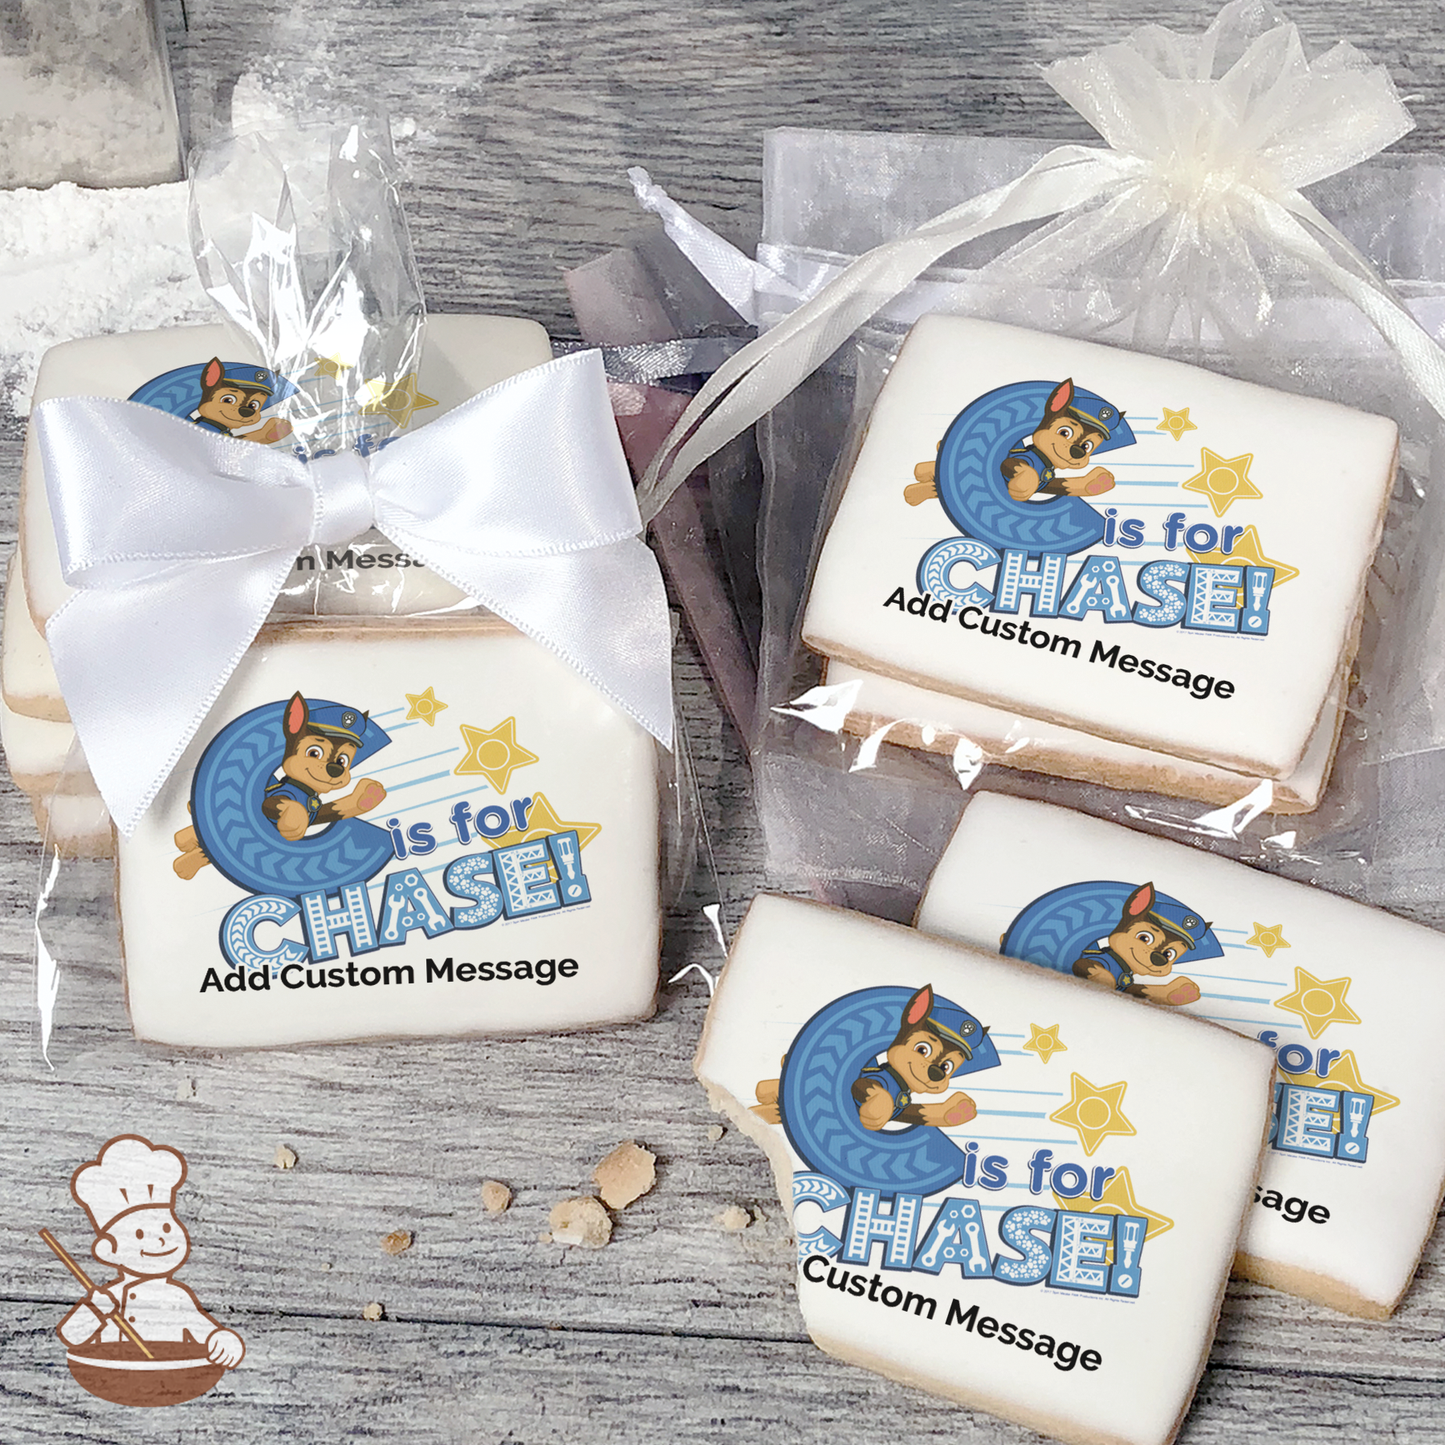 PAW Patrol C for Chase Custom Message Cookies (Rectangle)